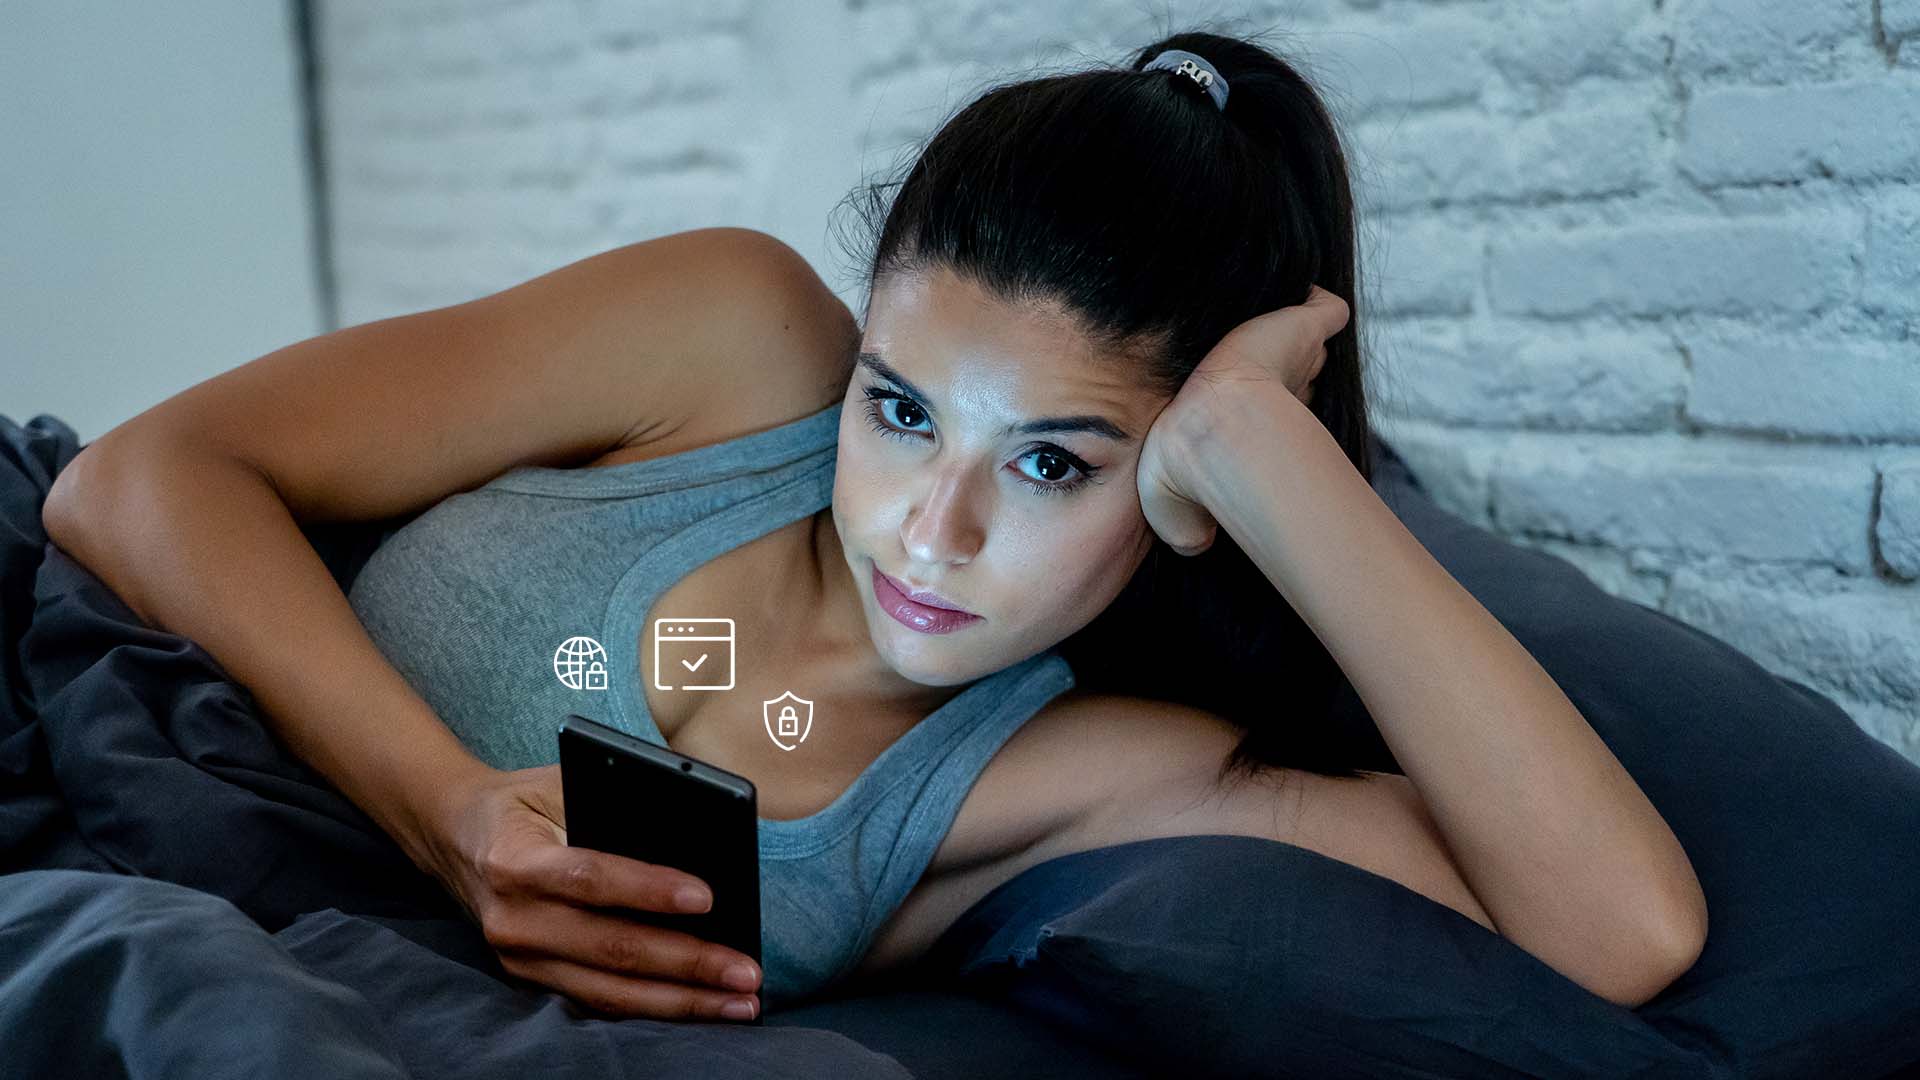 Brunette woman looking unamused while lying in her bed looking at her phone. Brick wall behind her.